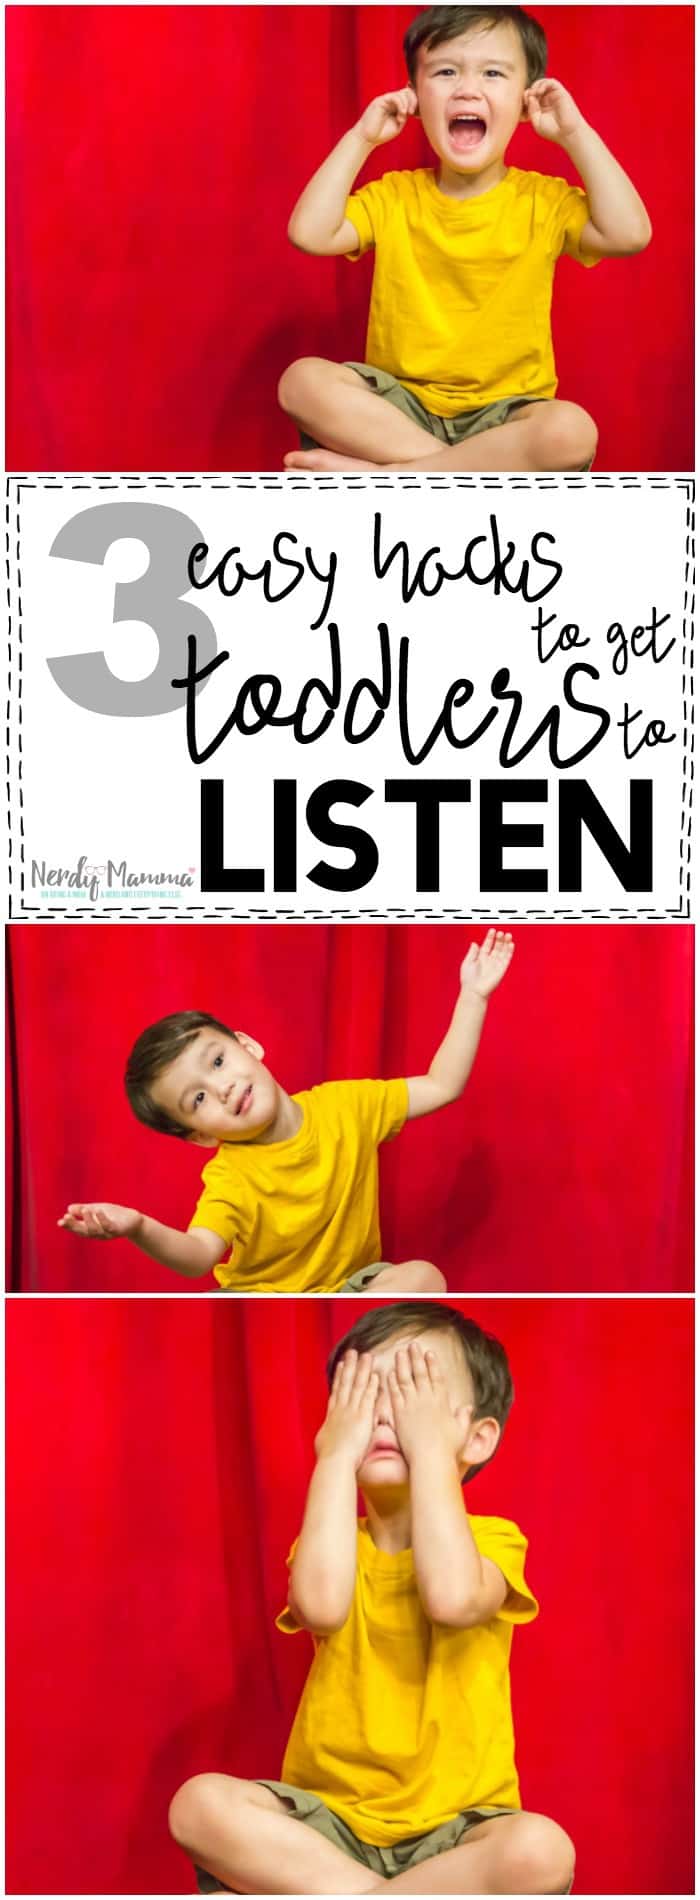 Oh, man, this mom's 3 easy tricks for getting toddlers to listen...genius!